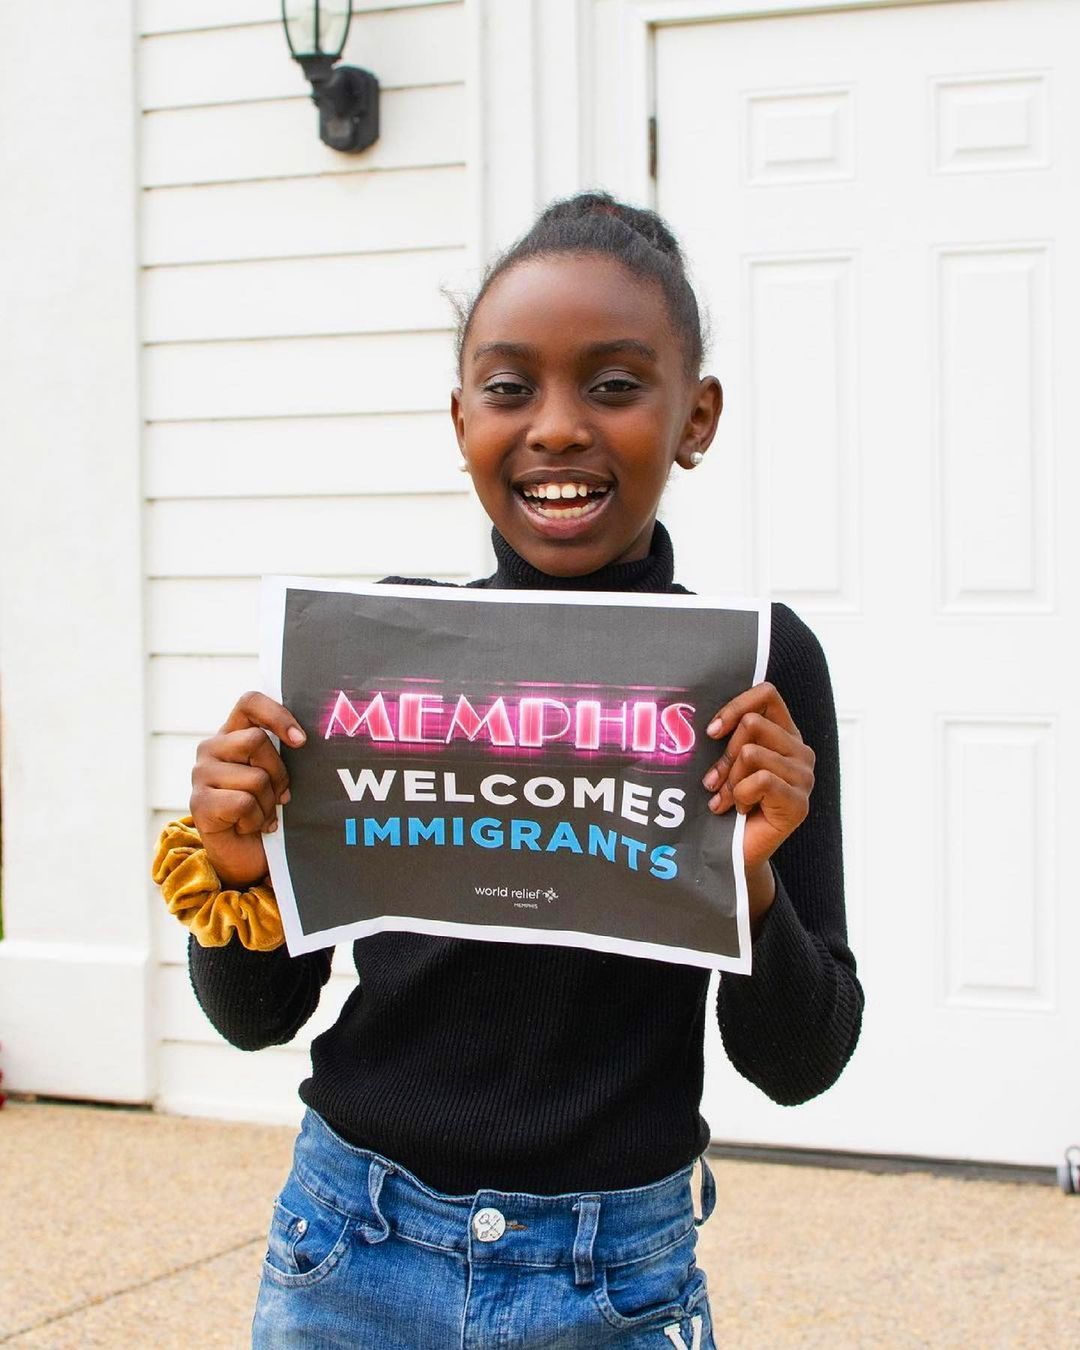 A young girl holding up a sign that says Memphis welcomes immigrants, promoting the efforts of Memphis nonprofits.